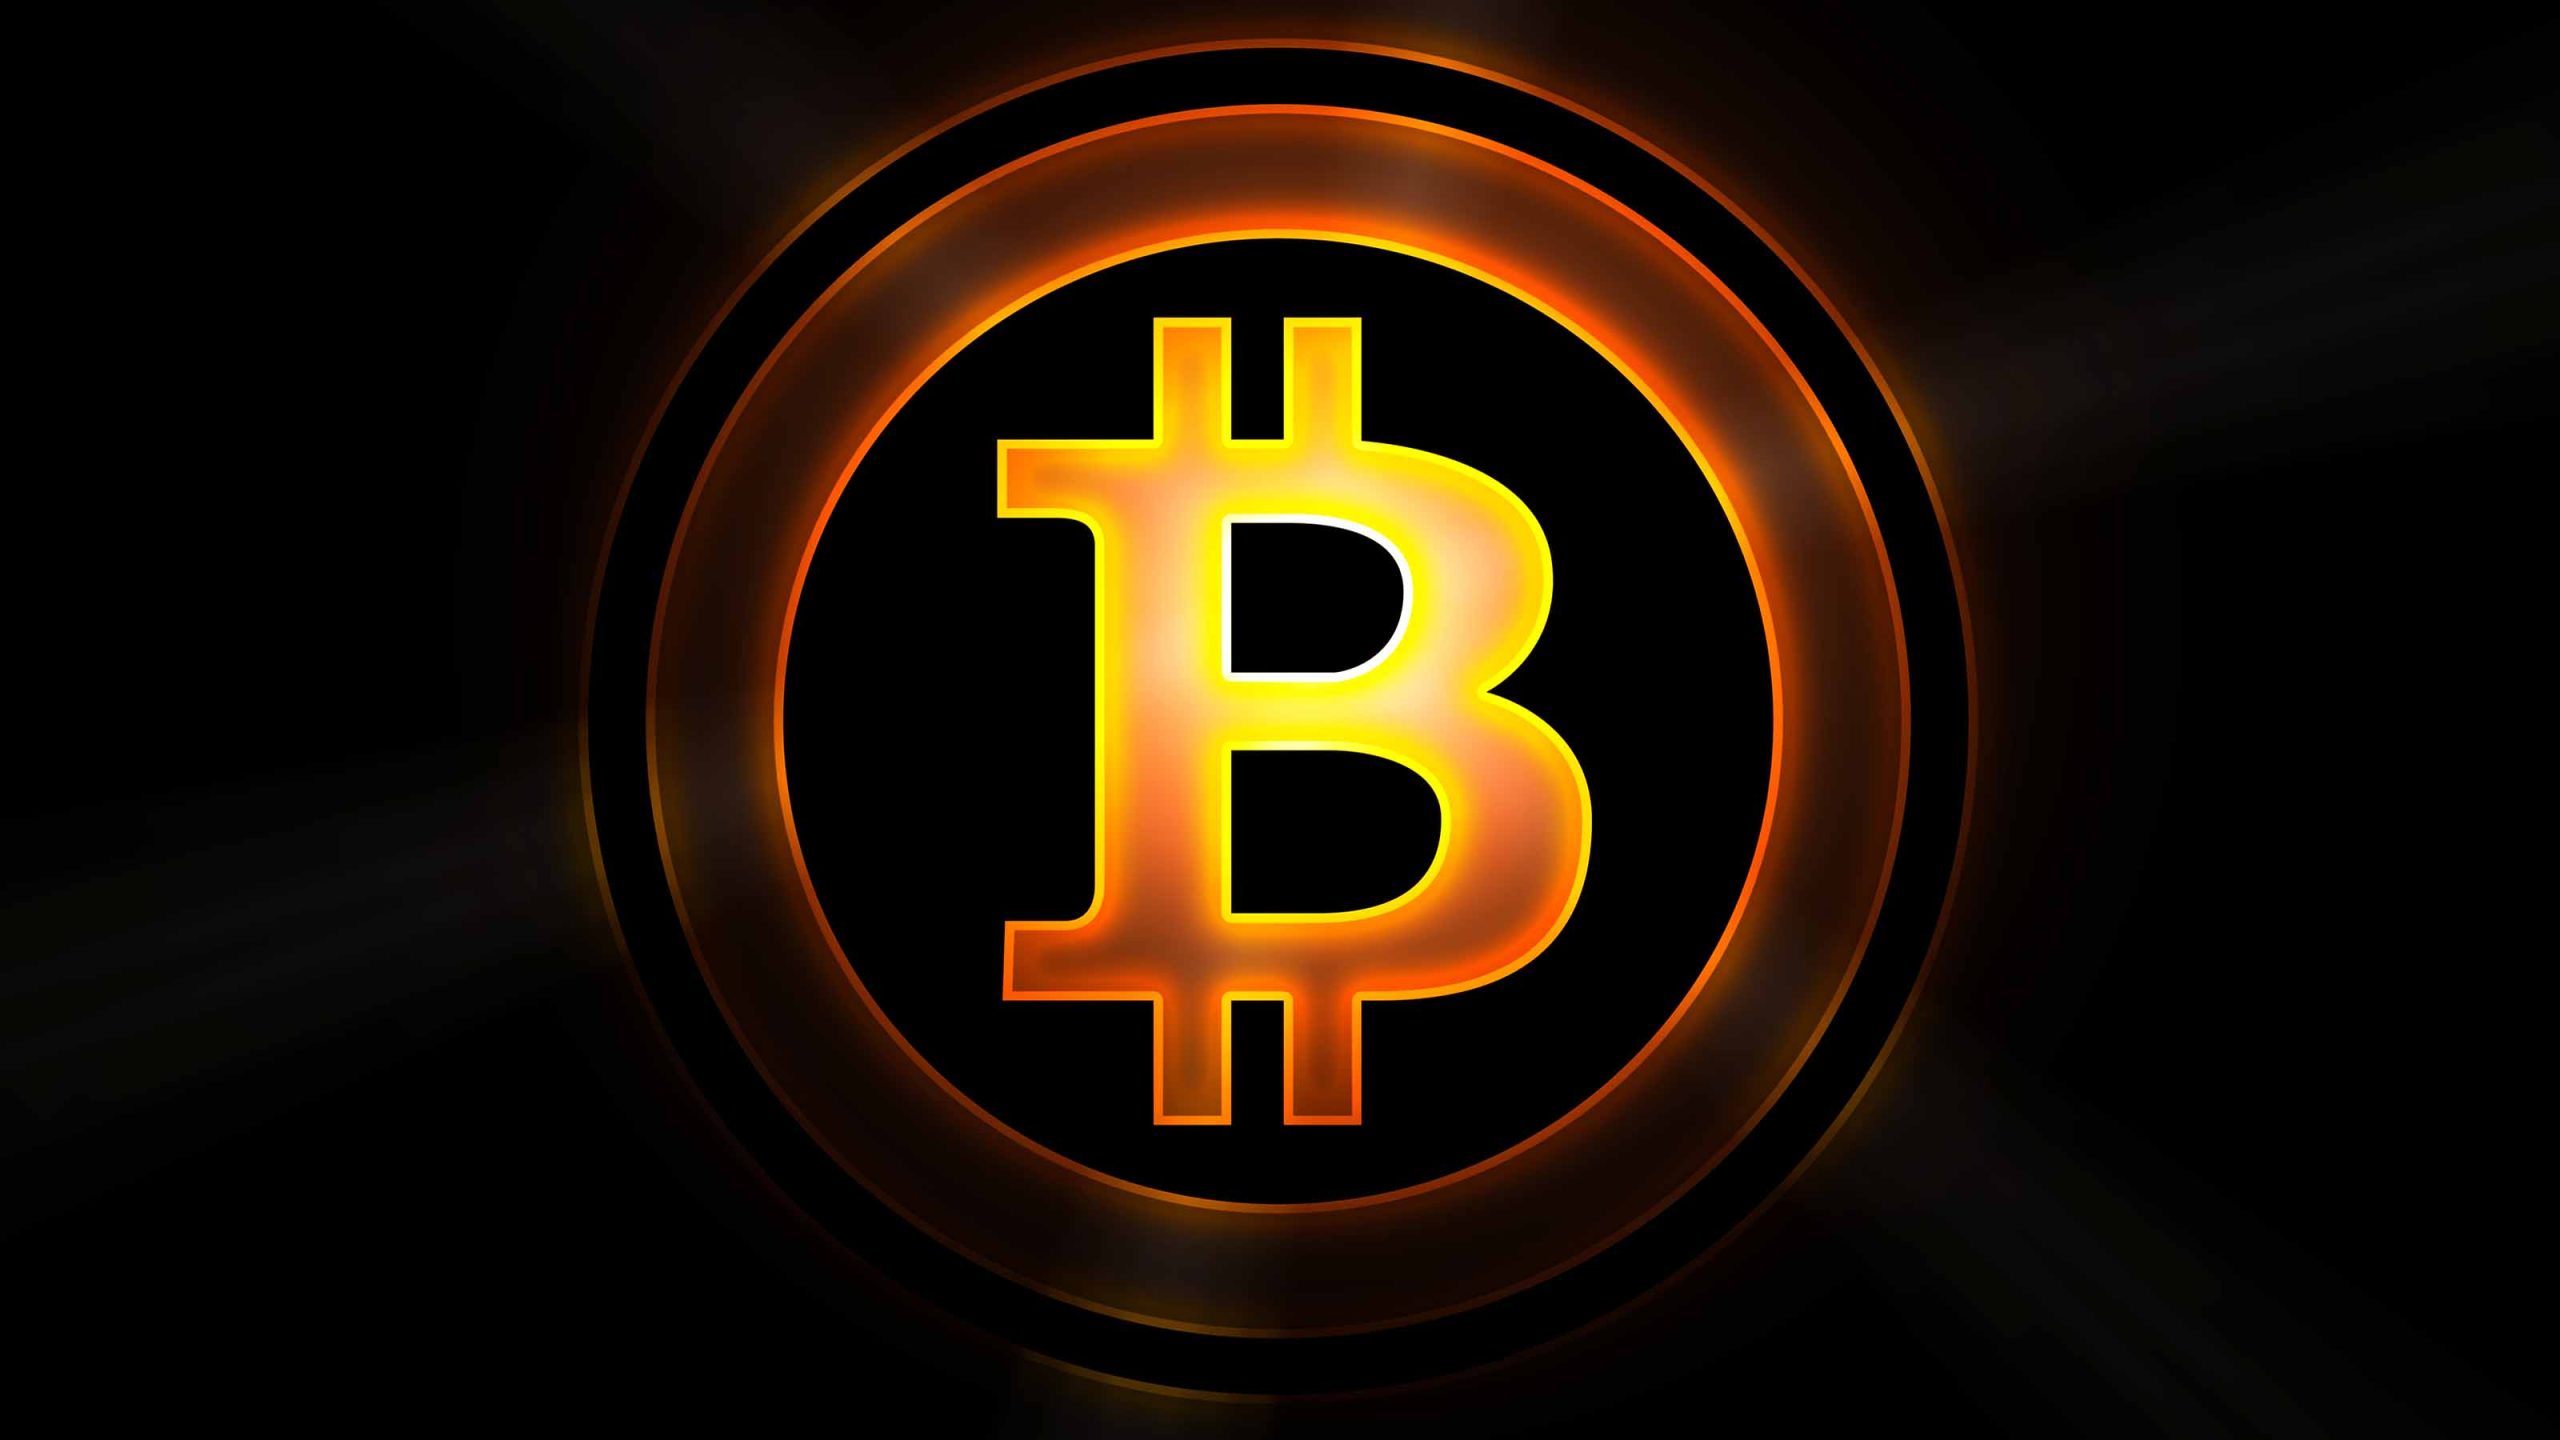 Bitcoin currency icon